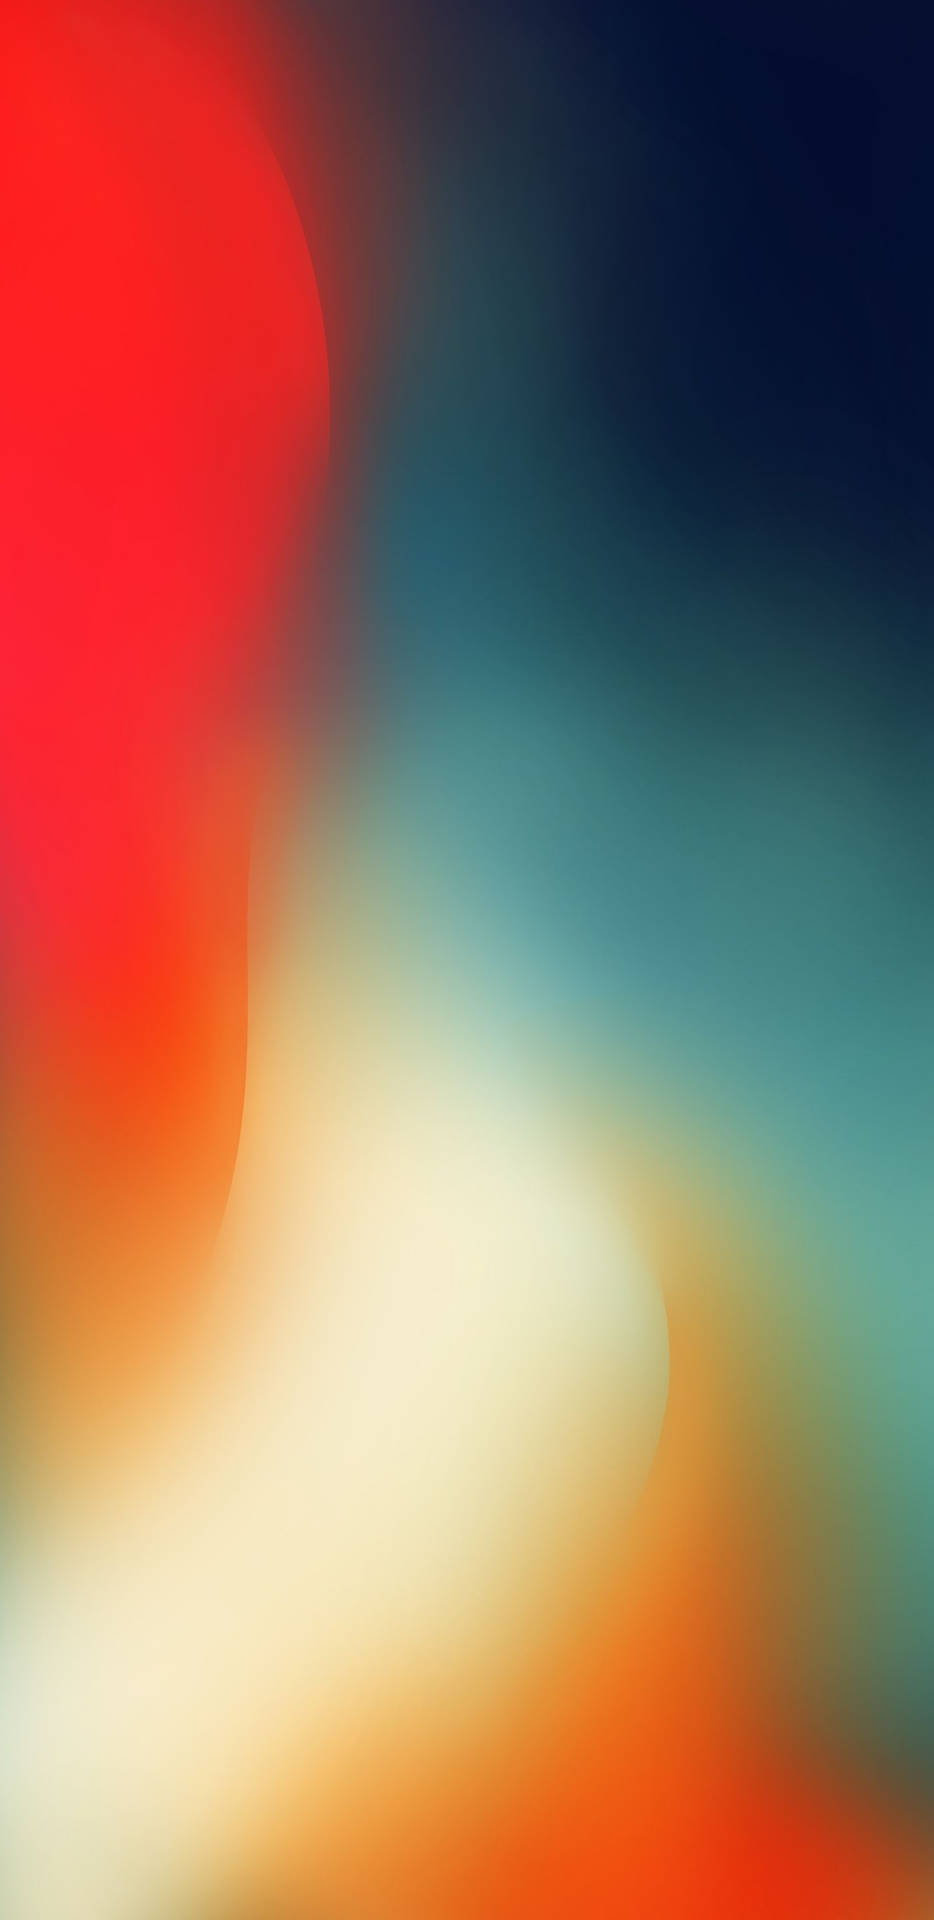 Hues Of Colours Simple Iphone Wallpaper